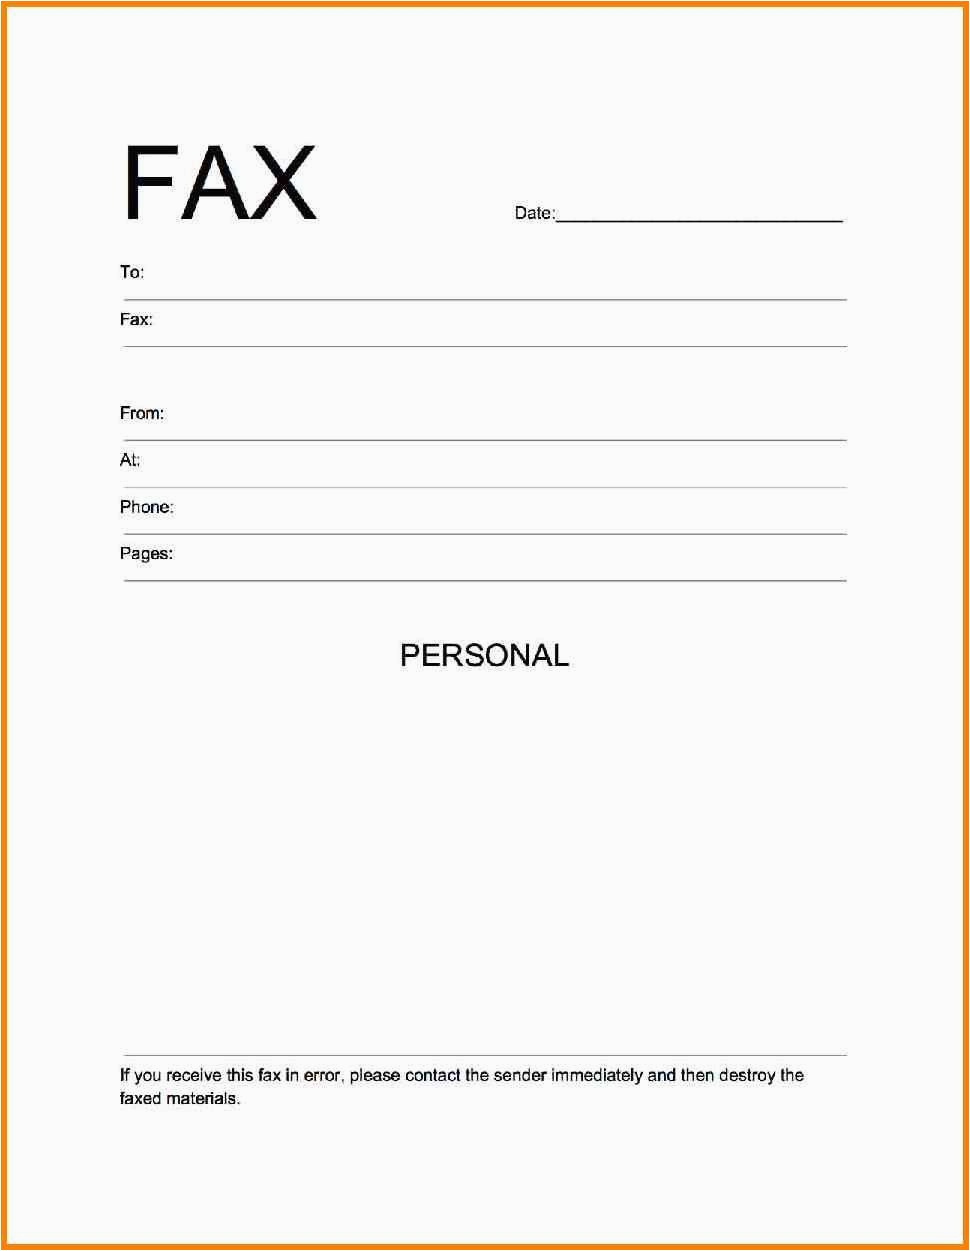 Sample Of Fax Cover Sheet for Resume Fax Cover Sheet Template Word Letter Resume Blank Cashier Resumes